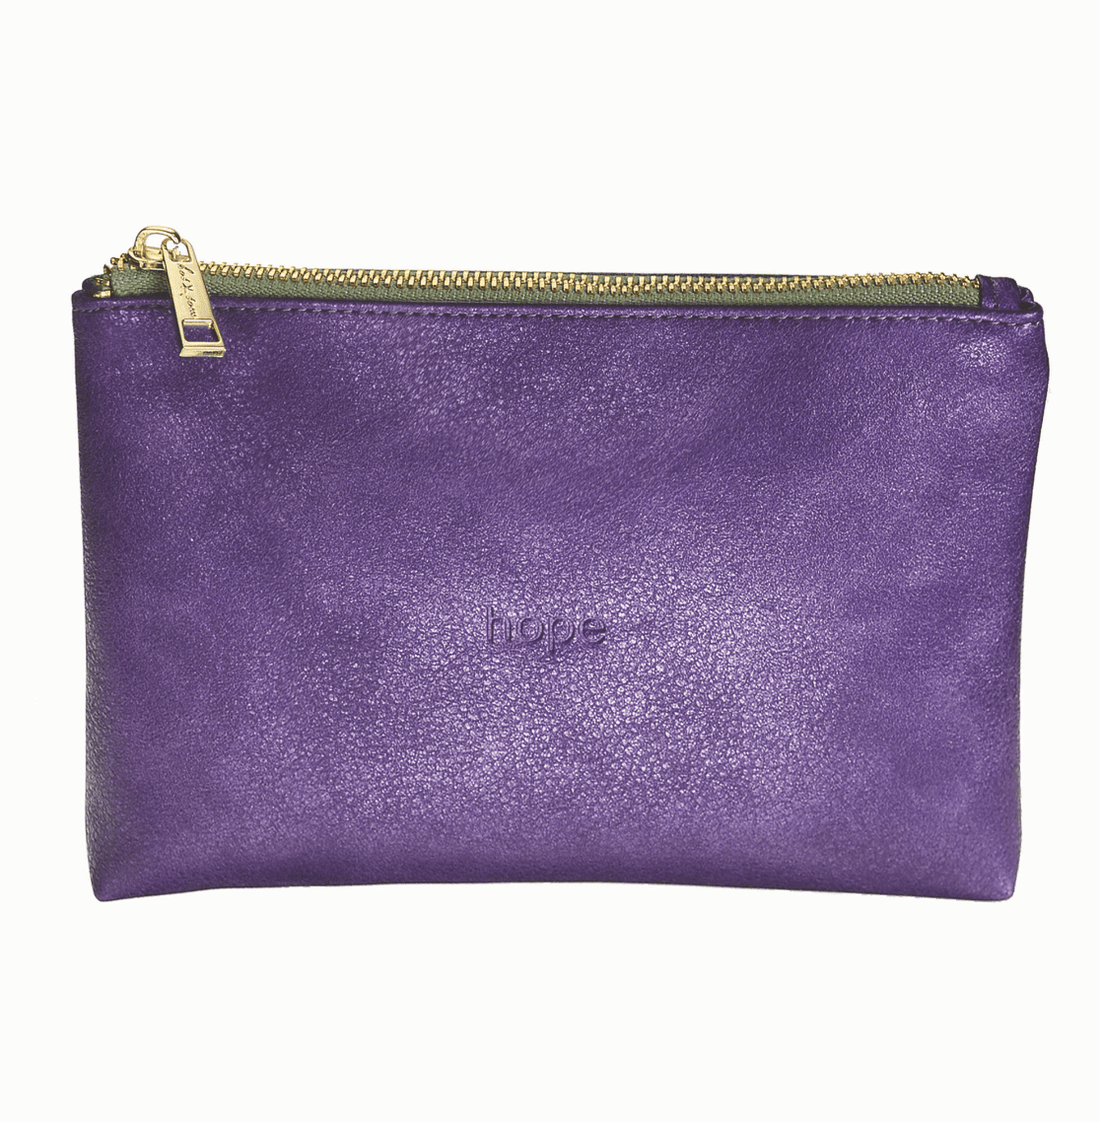 HOPE Make Up Pouch in Amethyst & Sage - WN481 Bags & Purses Hot Tomato